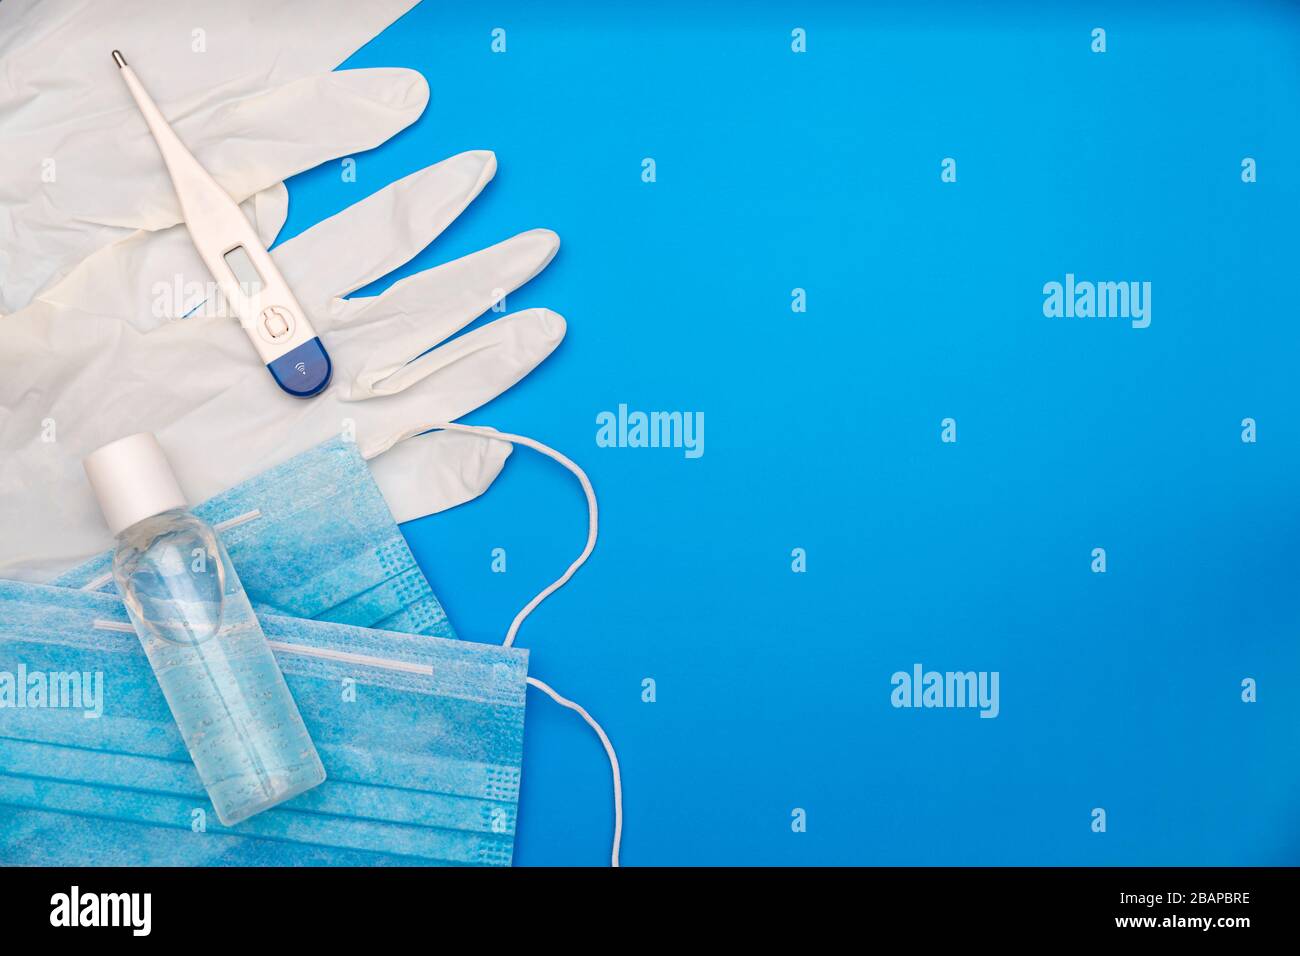 flat lay image of pandemic supplies on classic blue background Stock Photo